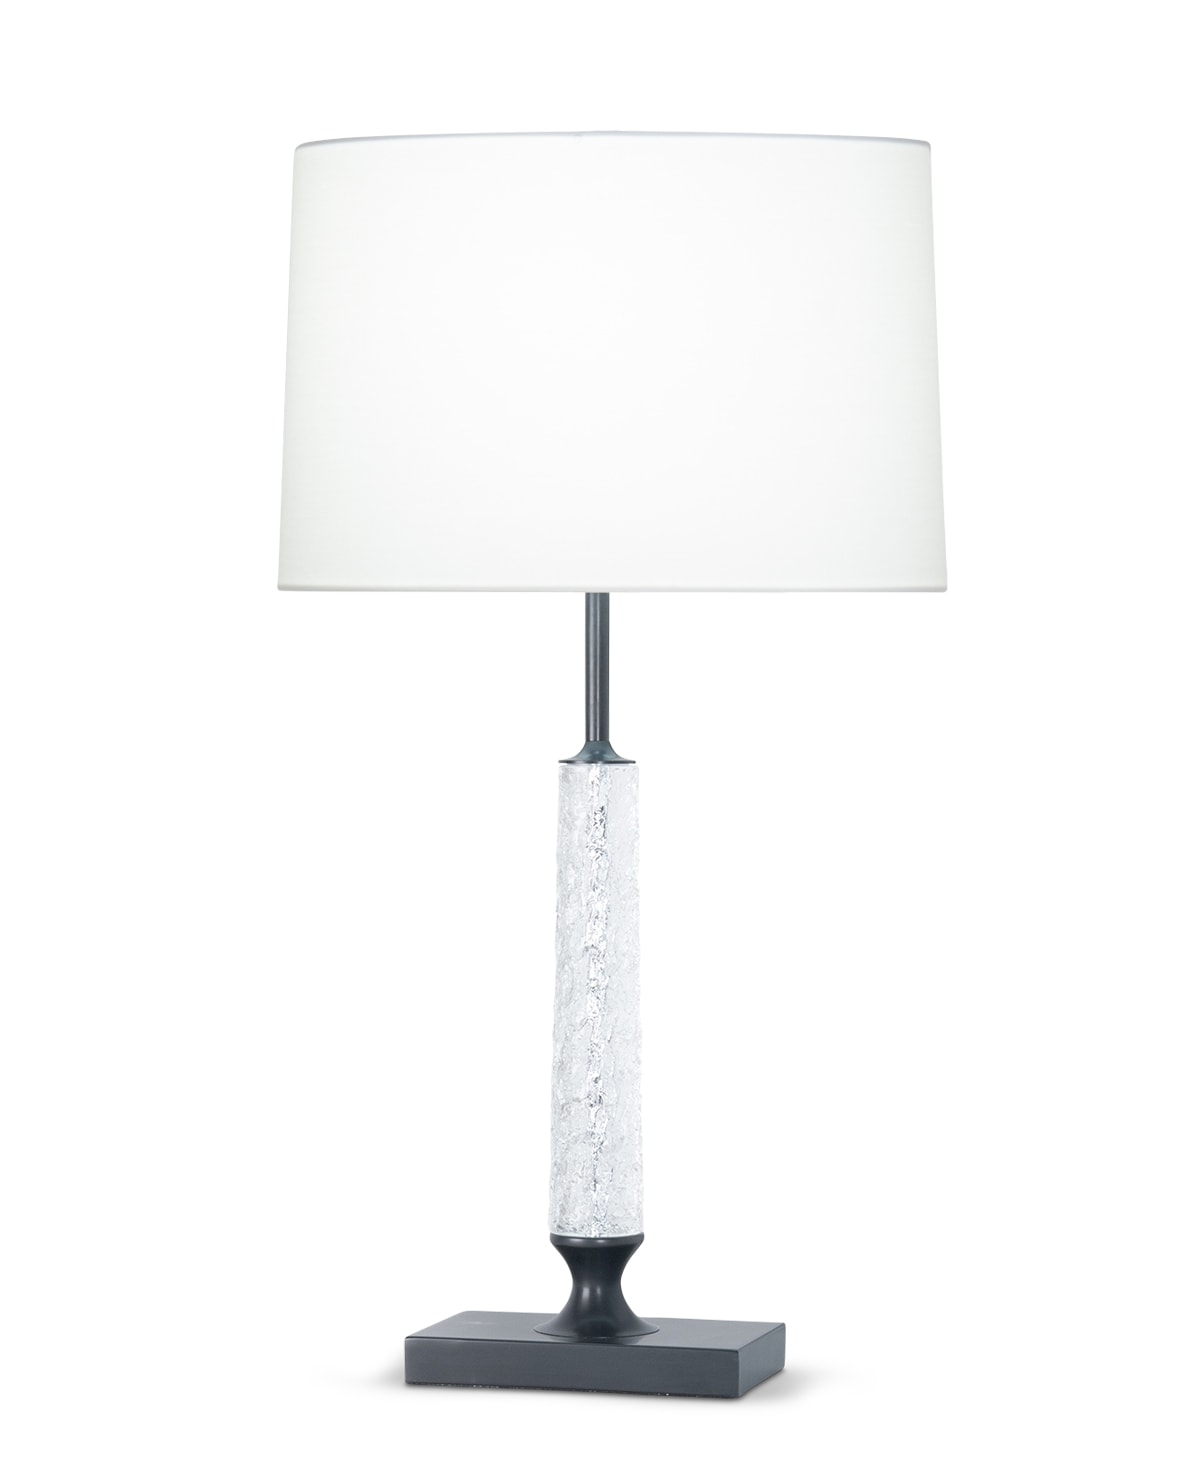 FlowDecor Hazel Table Lamp in metal with bronze finish and crystal and off-white cotton oval shade (# 4554)